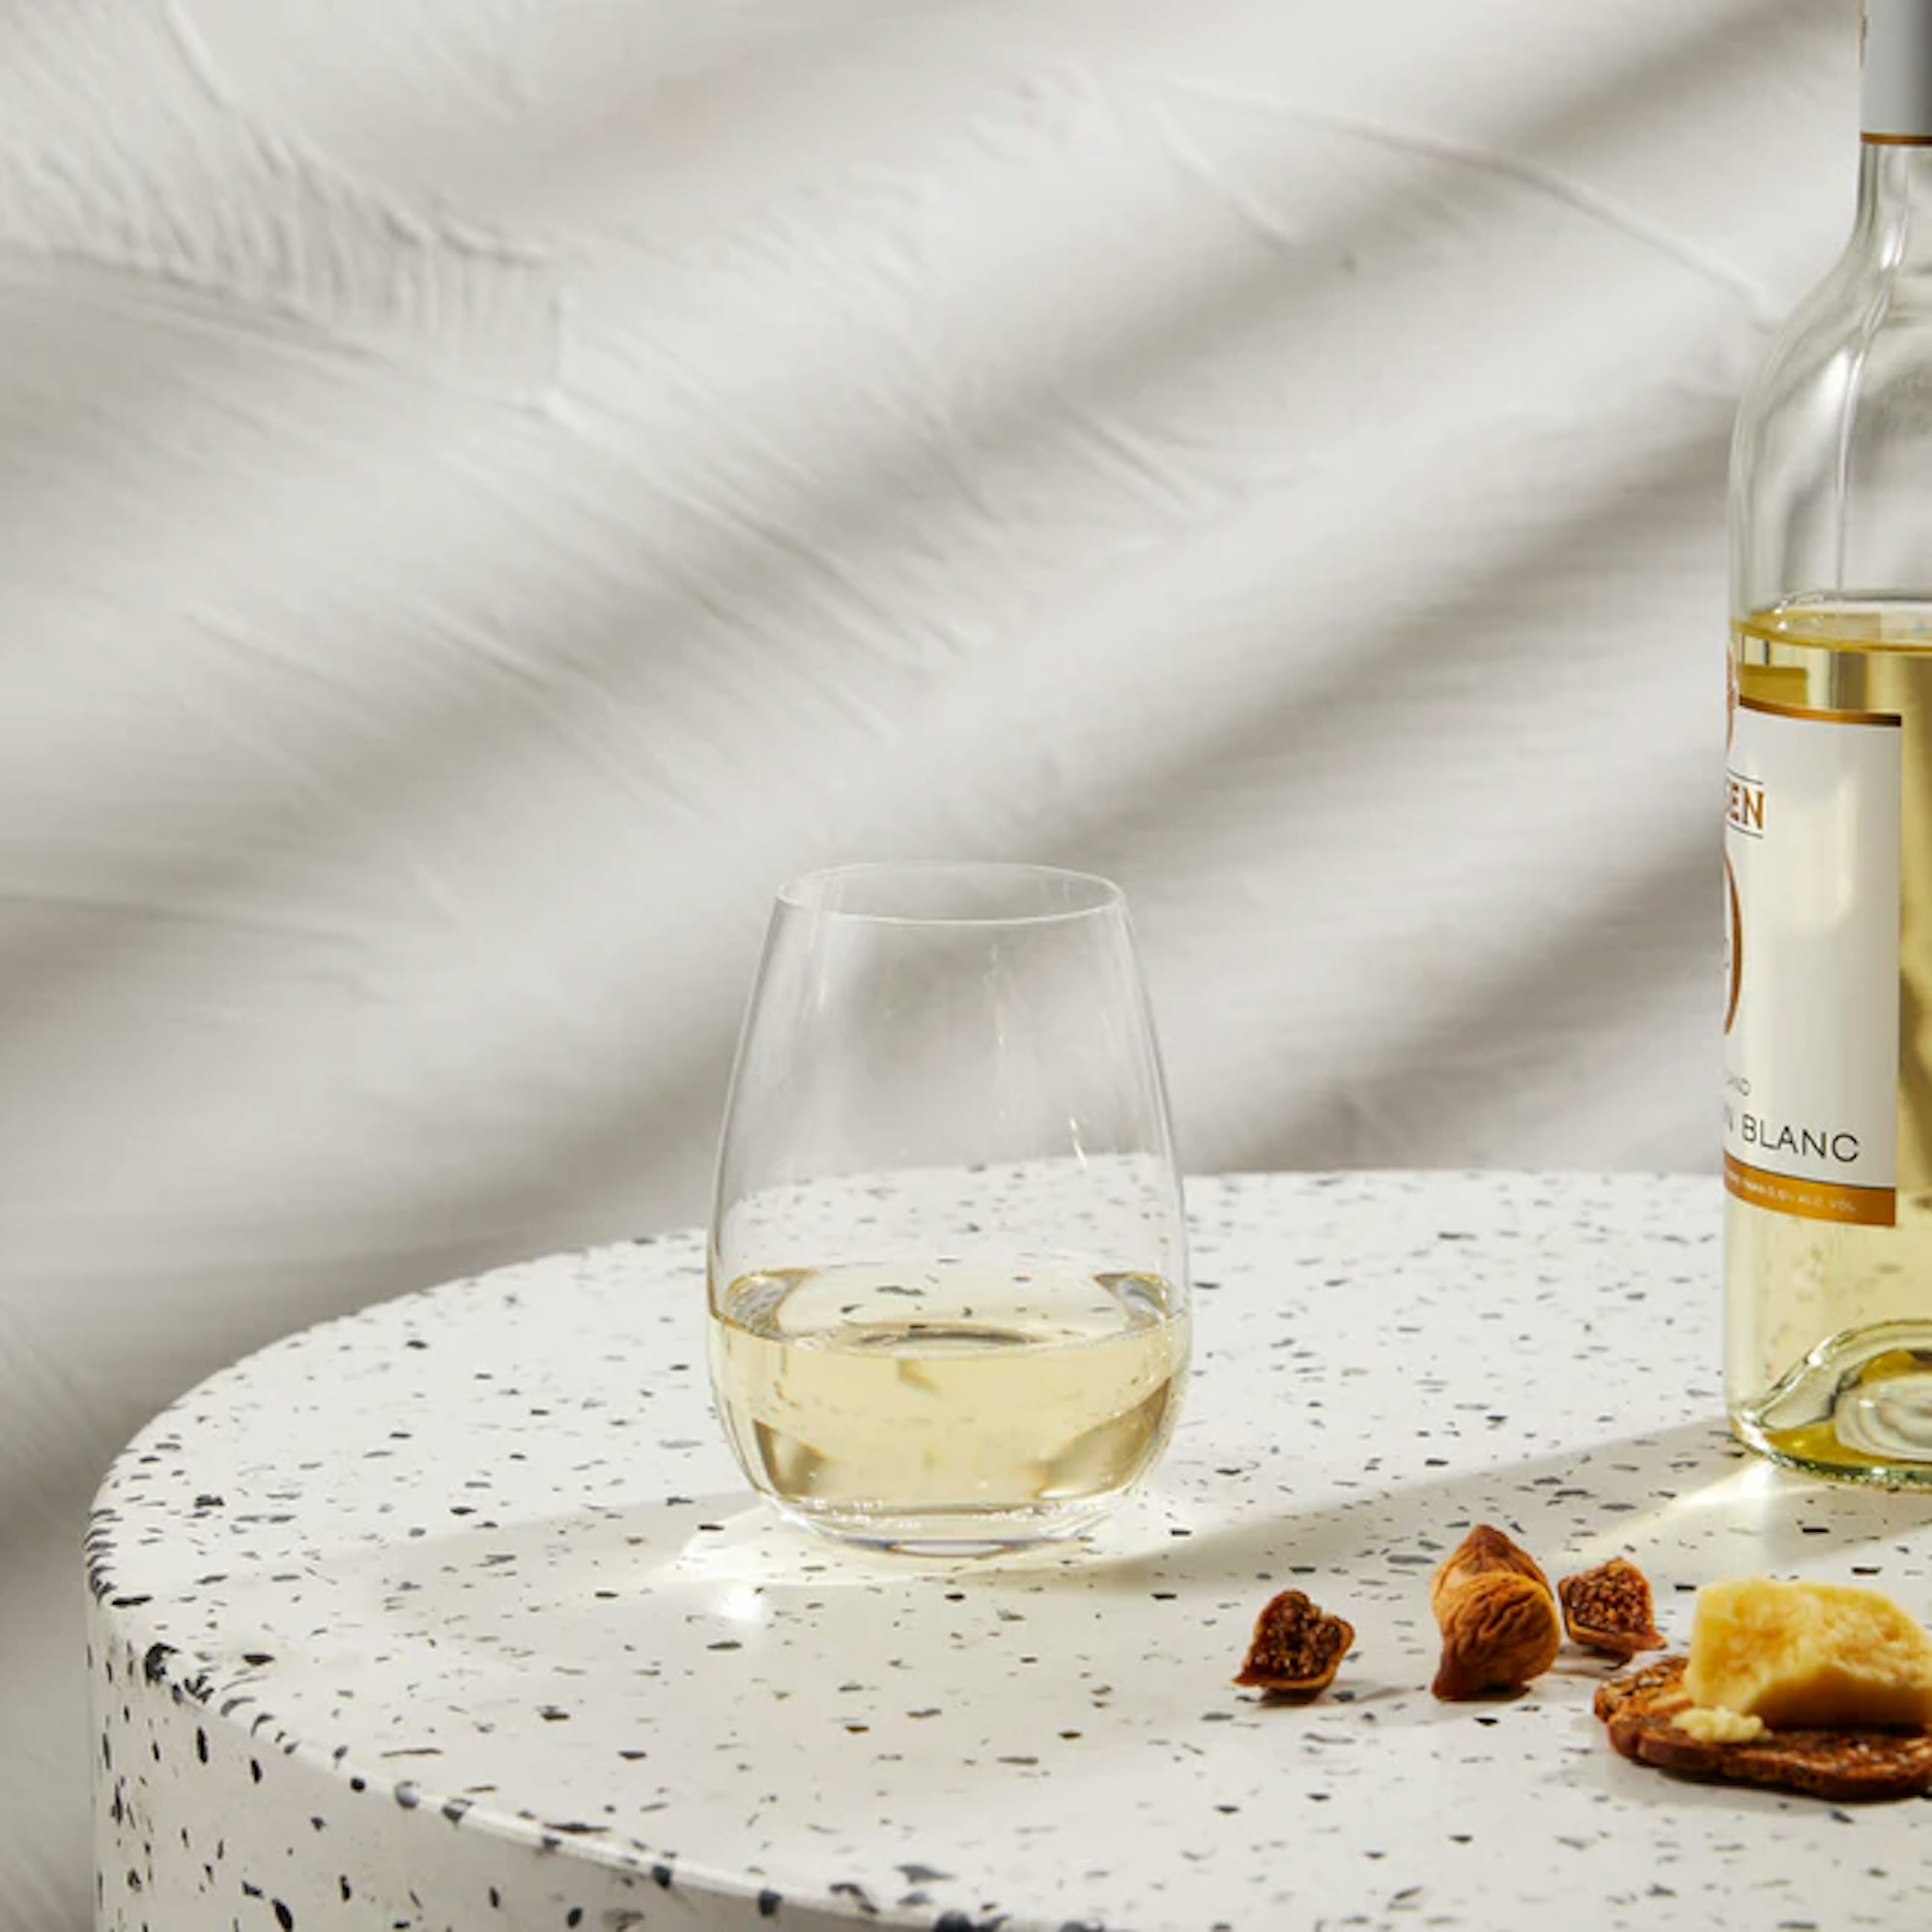 Modern wine glass with white wine placed on a round bench